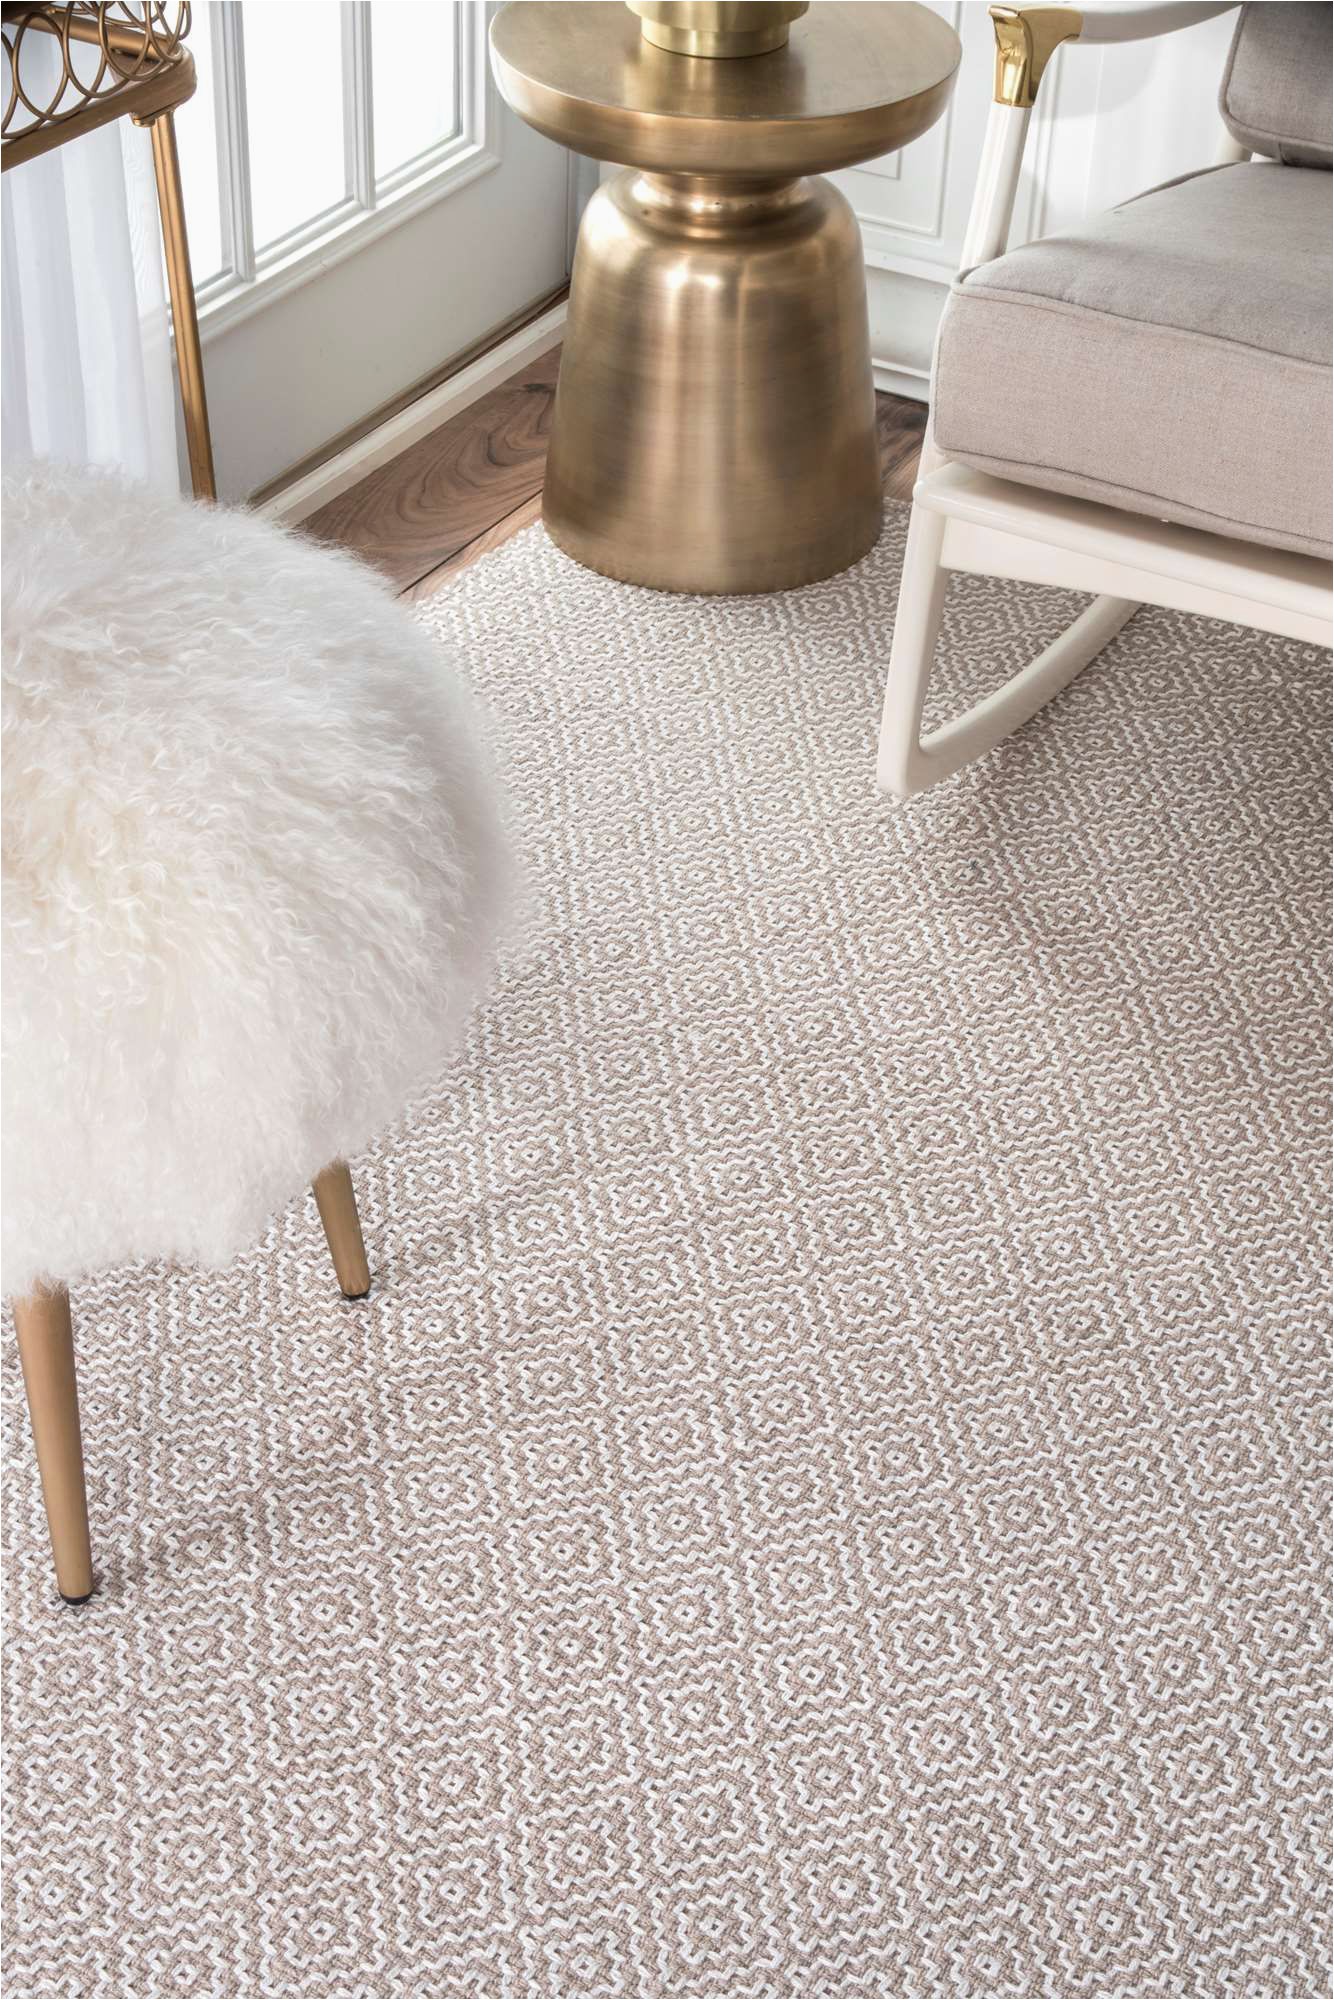 100 Percent Cotton area Rugs Perfect for A Casual yet Contemporary Living or Dinner area